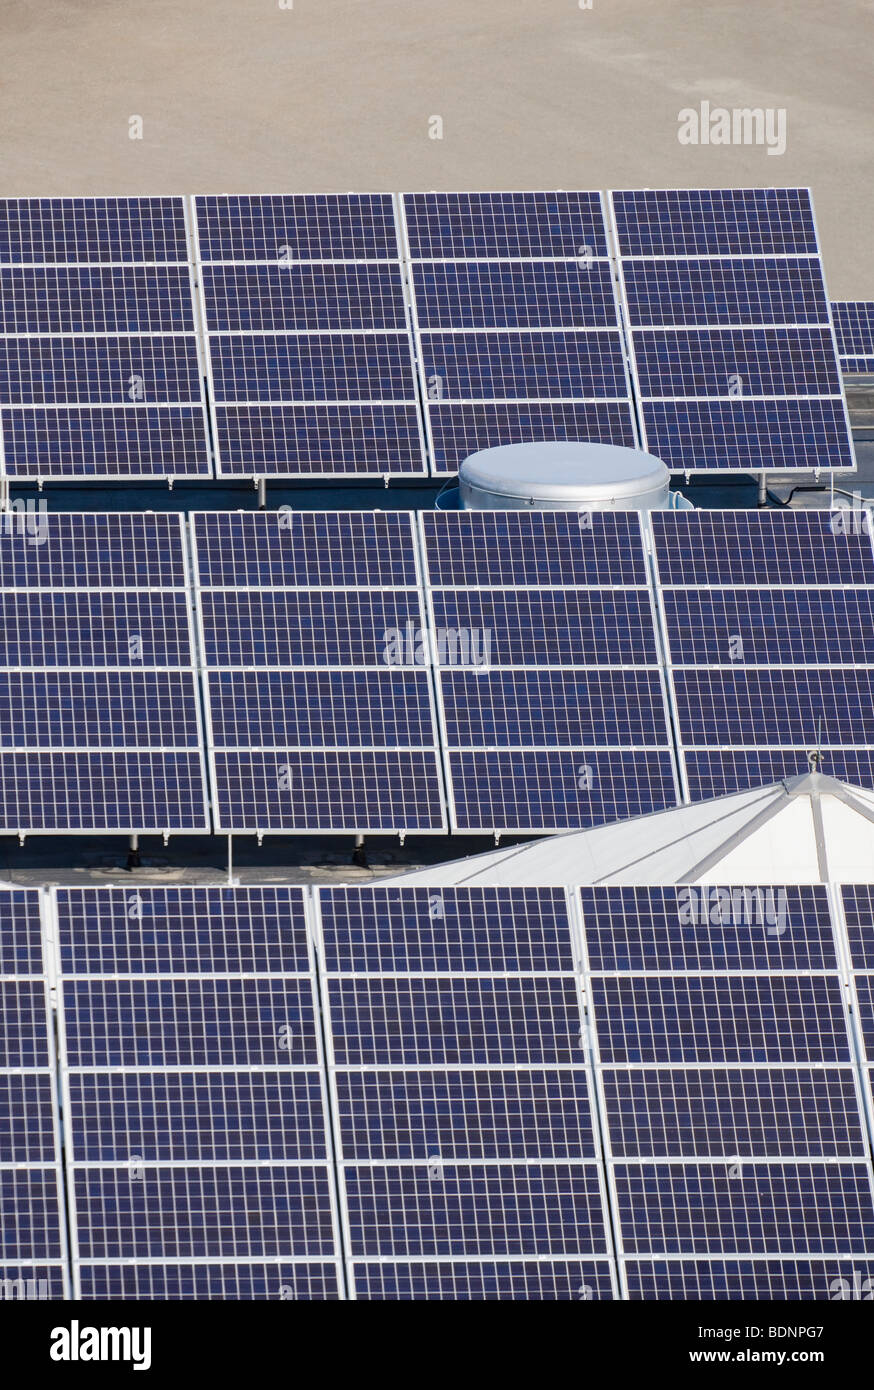 High angle view of solar panels in an industry Stock Photo